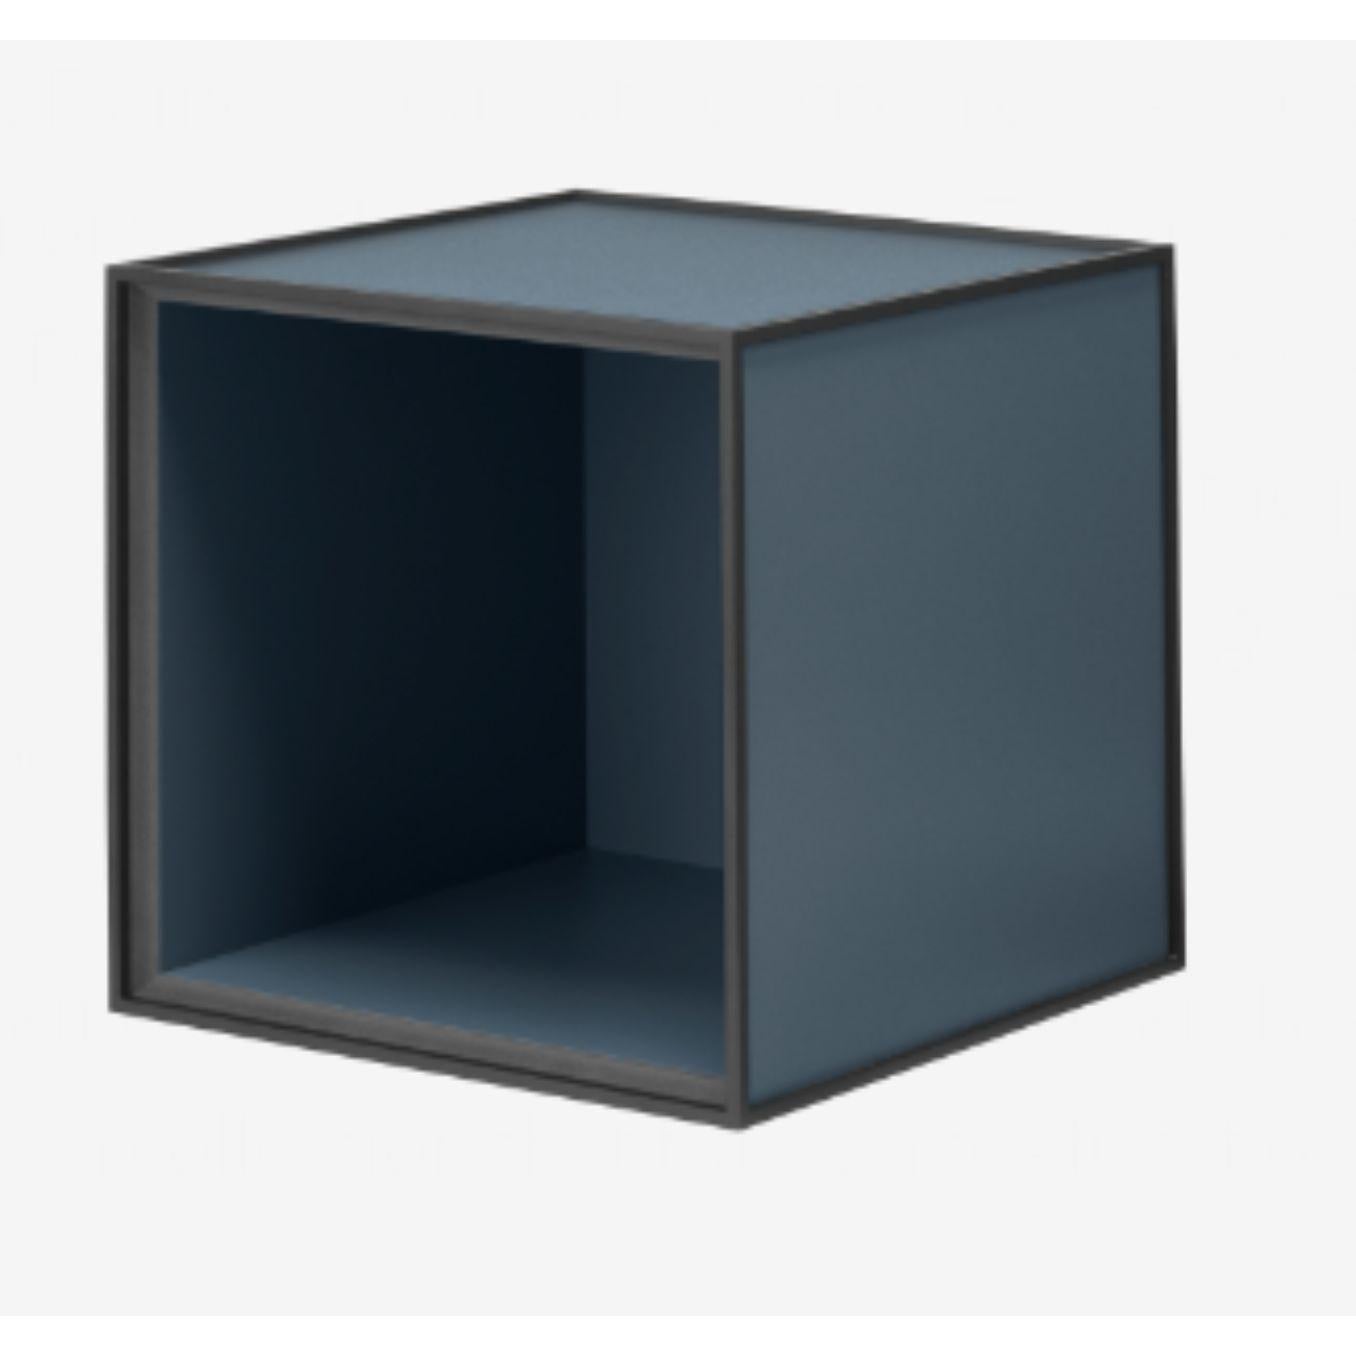 28 Fjord frame box by Lassen
Dimensions: W 28 x D 28 x H 28 cm 
Materials: Finér, Melamin, Melamin, Melamine, Metal, Veneer, Oak
Also available in different colors and dimensions. 

By Lassen is a Danish design brand focused on iconic designs